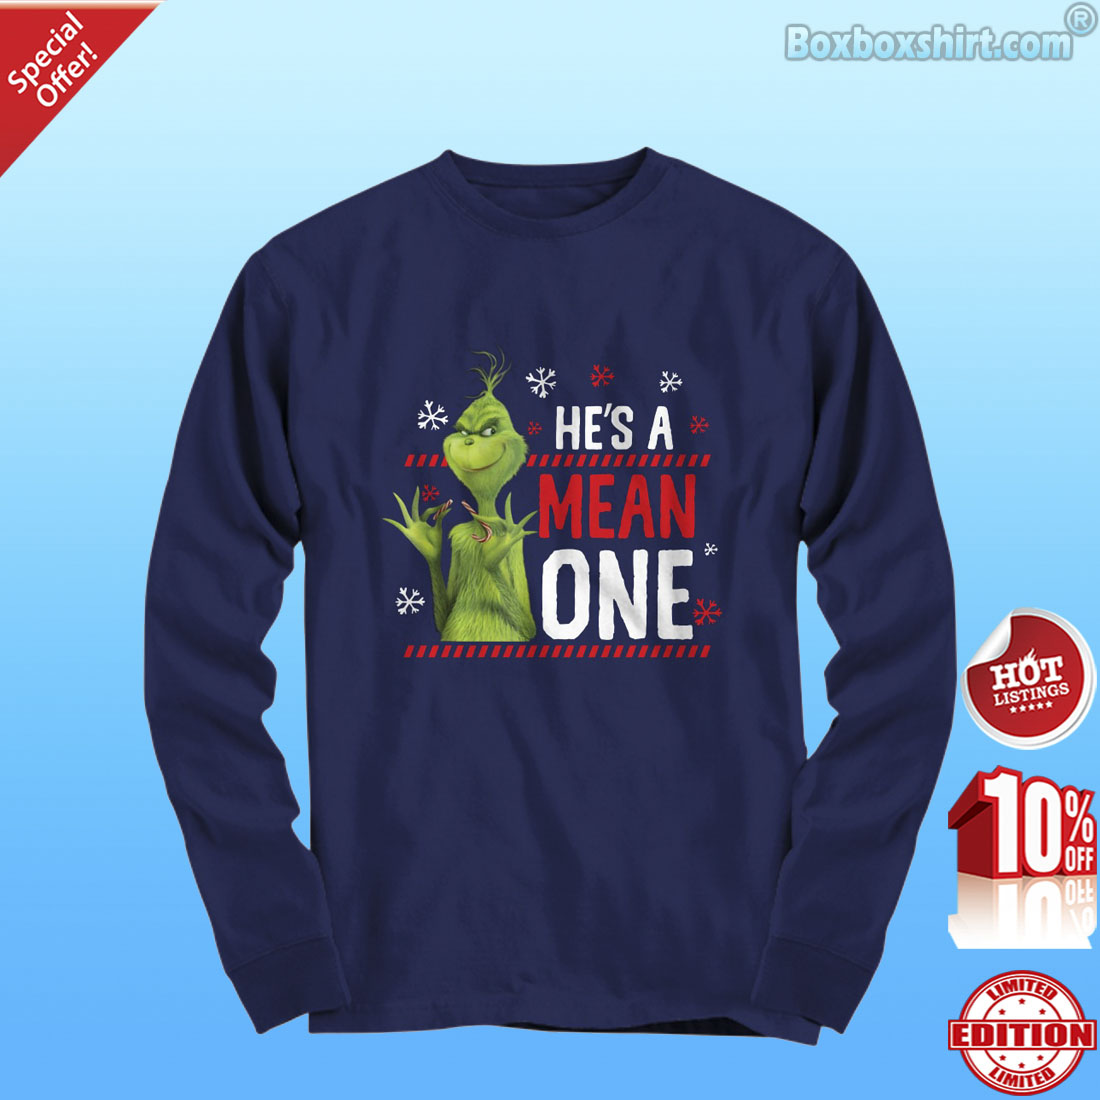 He's a mean one Mr Grinch shirt